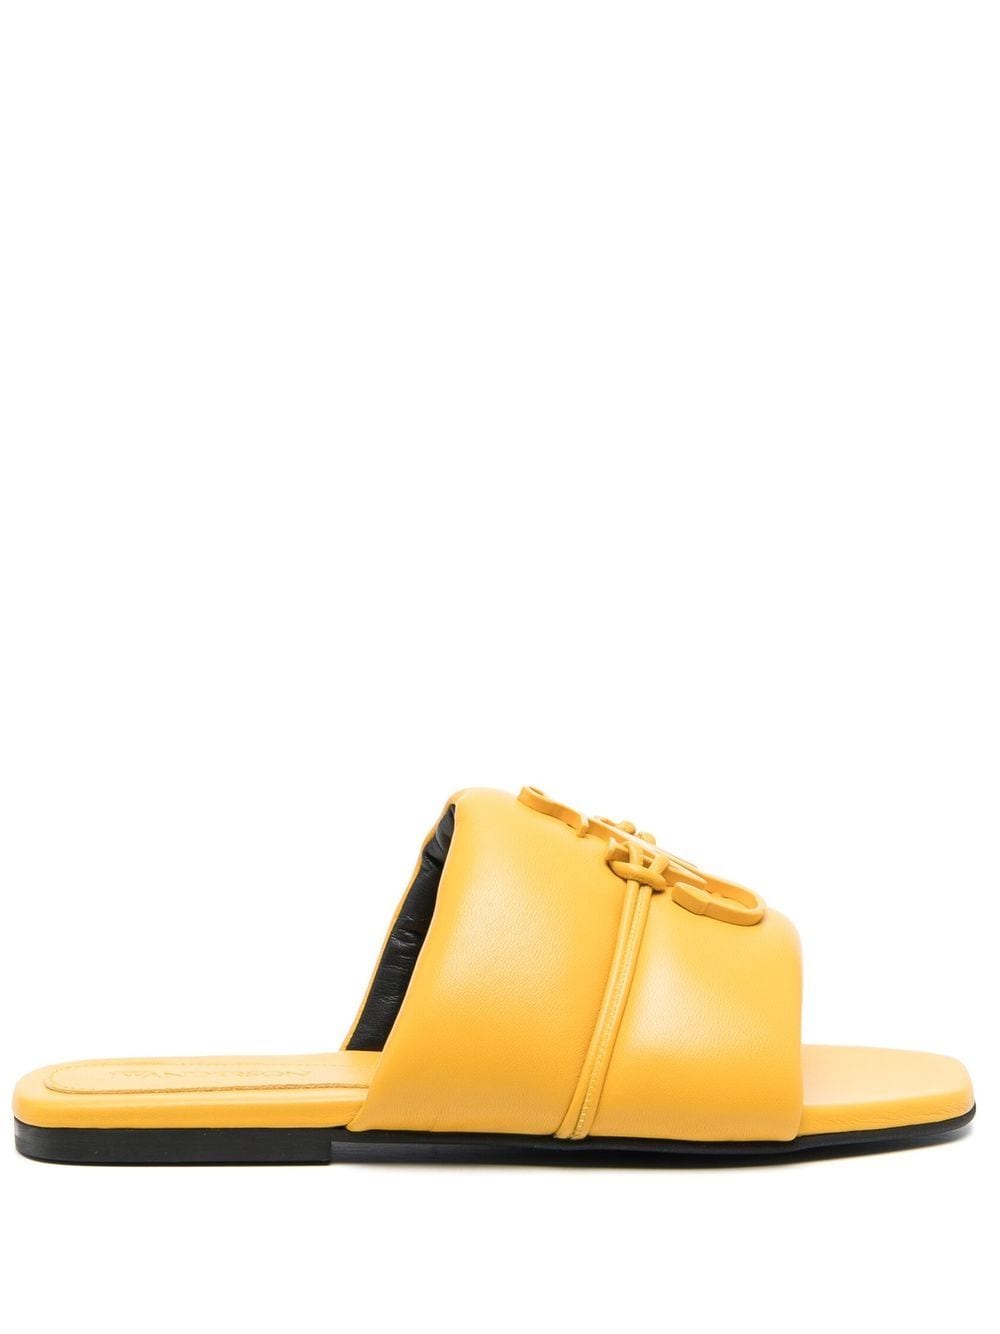 JW Anderson logo-plaque leather sandals - Yellow